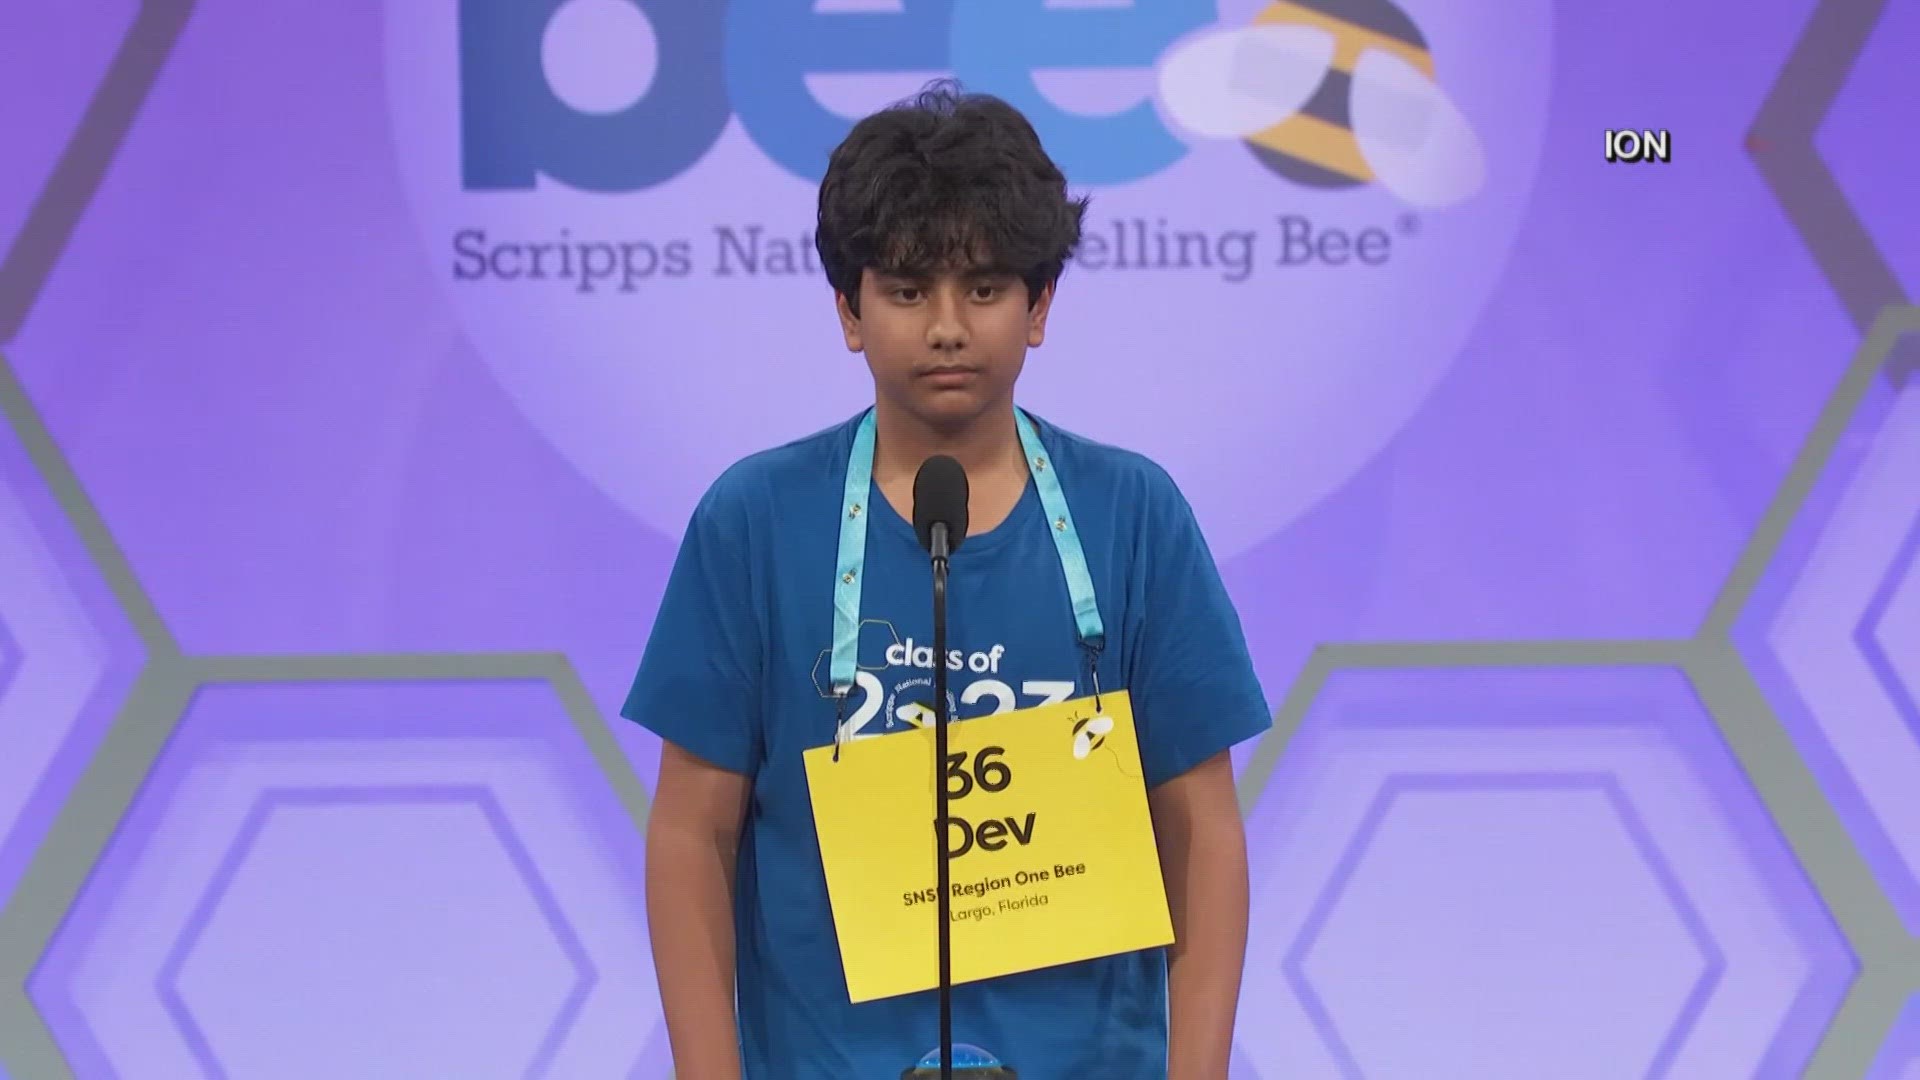 Dev Shah, 14, of Largo, Florida, spelled the word correctly and won the Scripps National Spelling Bee.